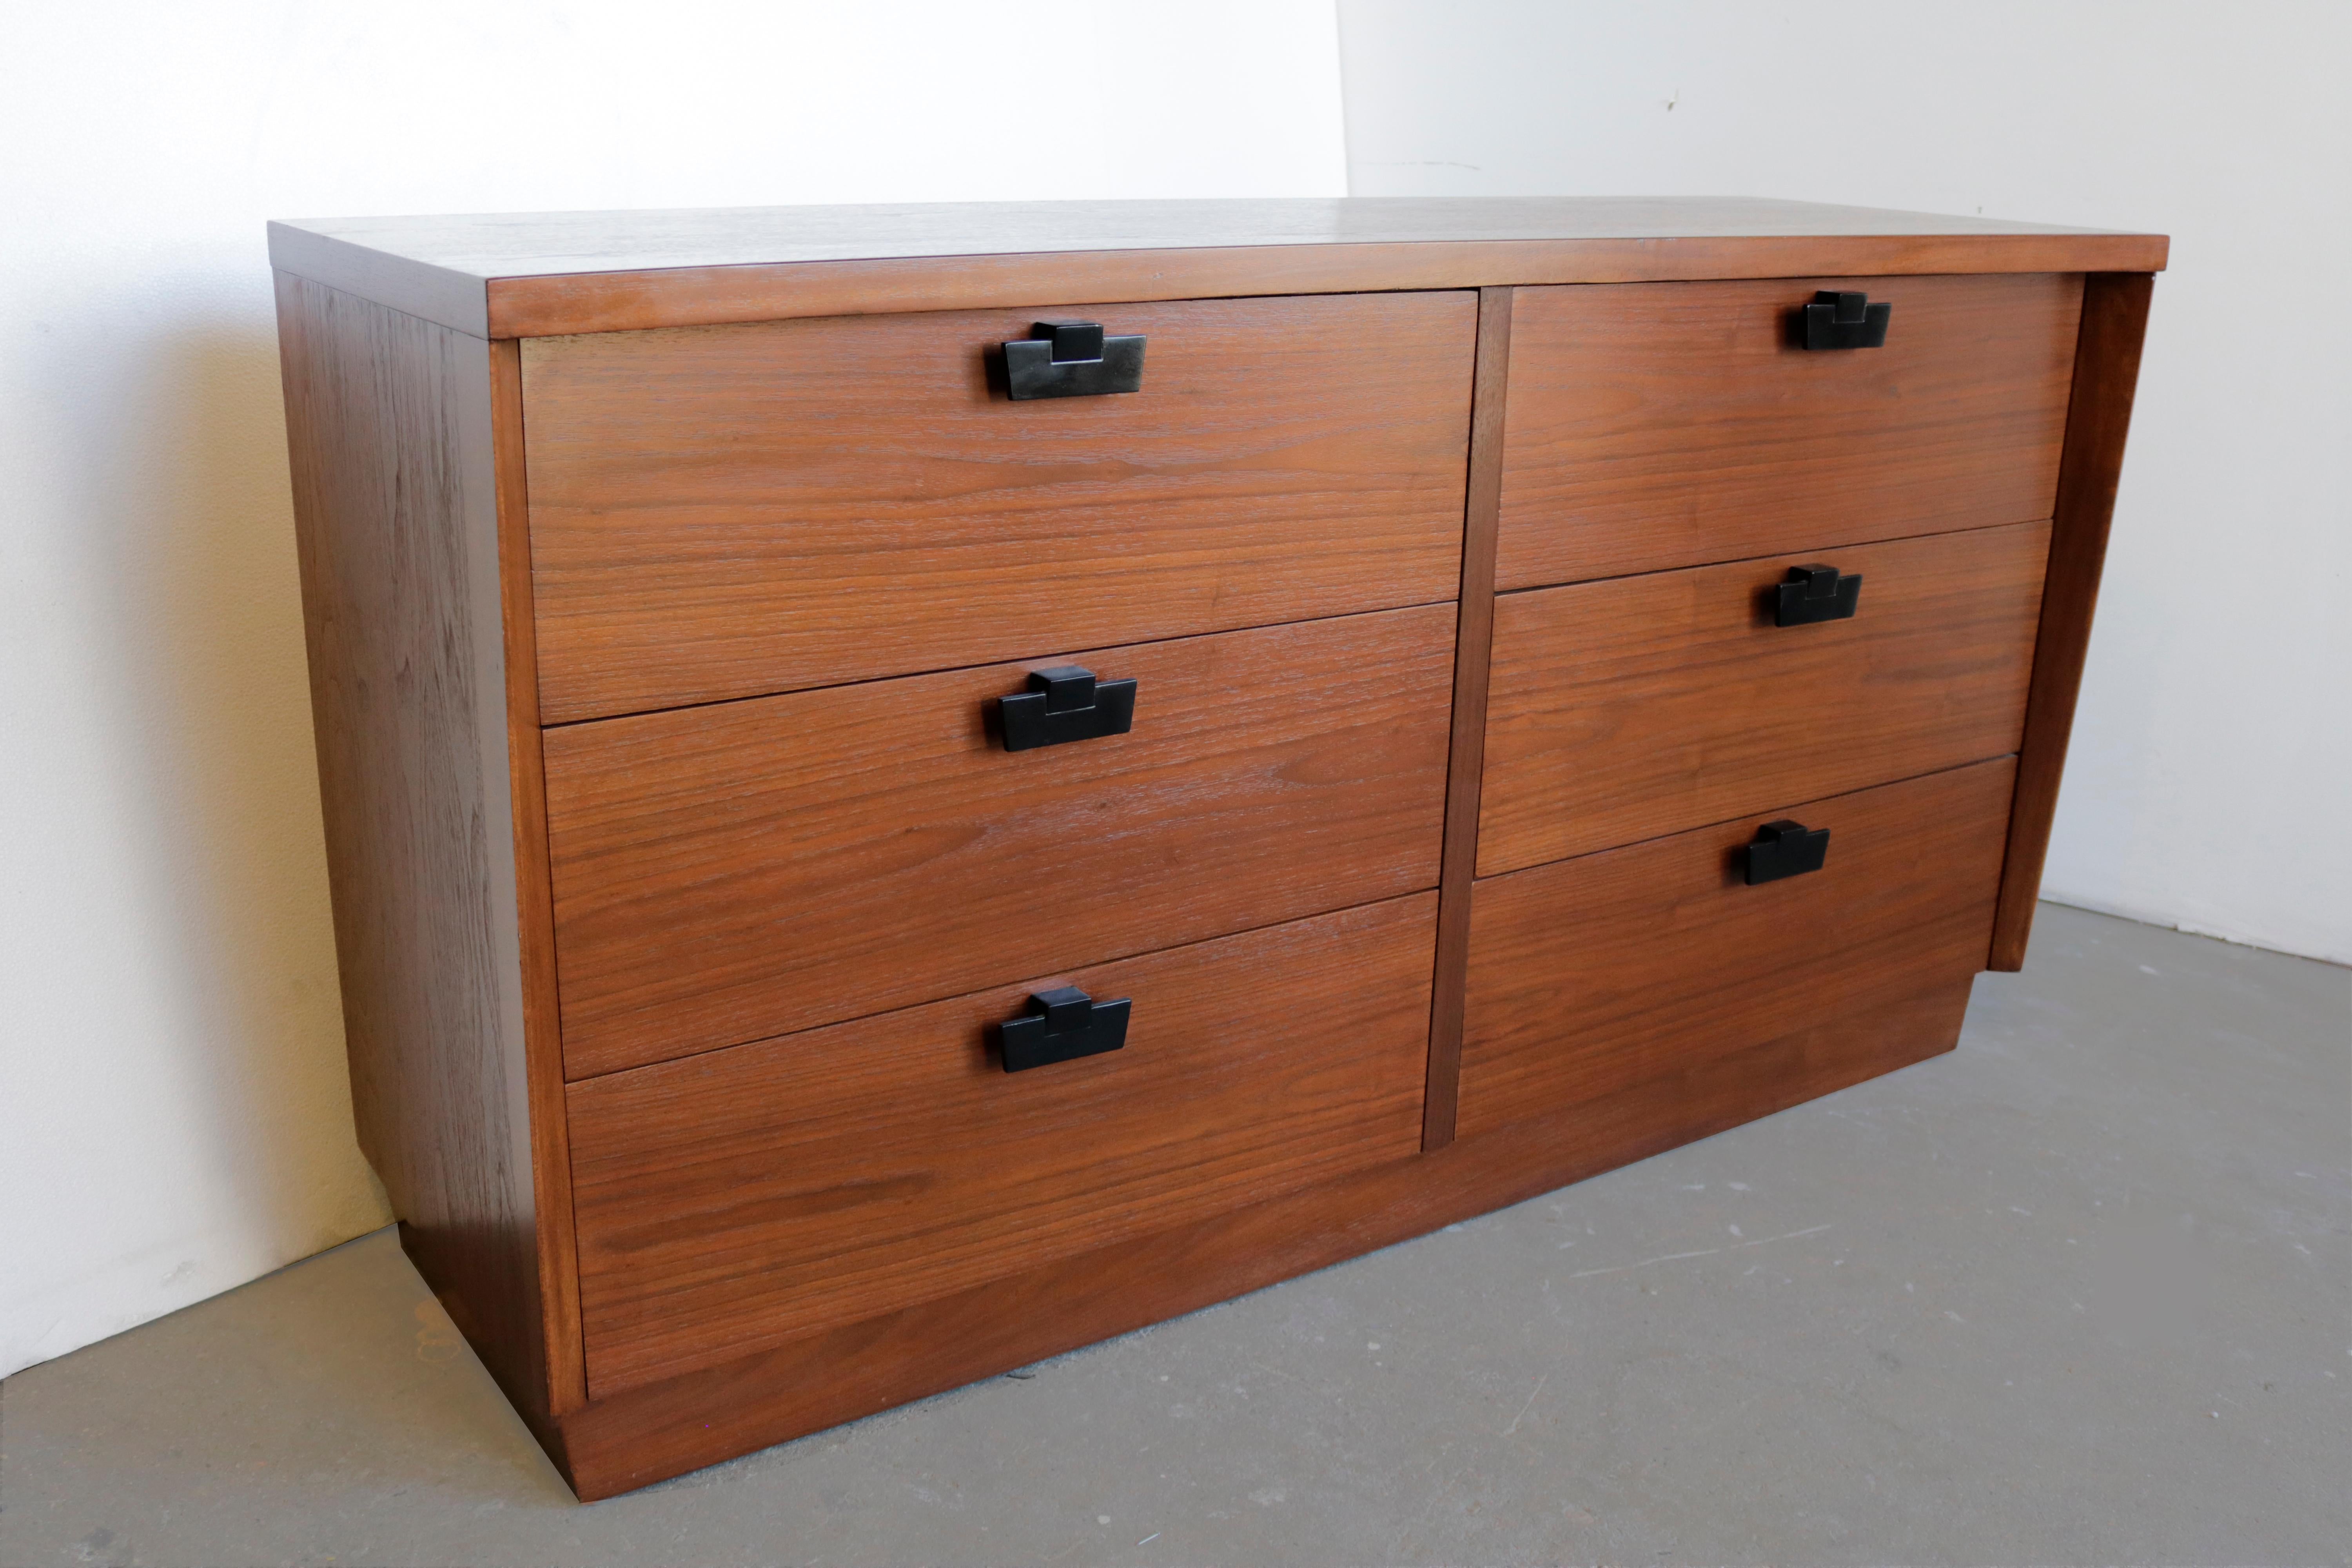 This dresser made of walnut features six drawers with black painted metal pulls.
Very interesting lines and like always with American of Martinsville pieces very high-quality craftsmanship.